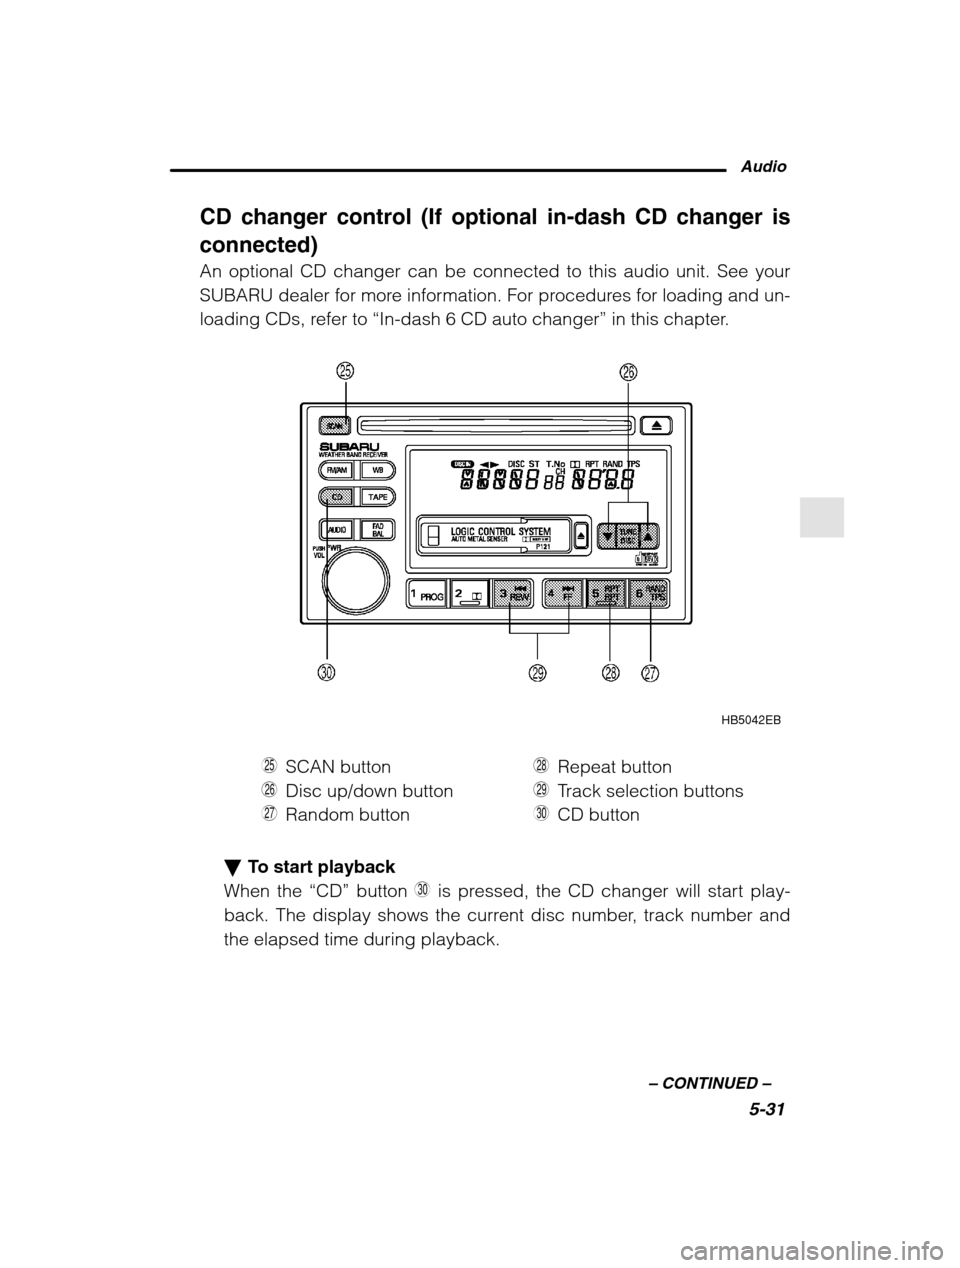 SUBARU LEGACY 2002 3.G Owners Manual Audio5-31
–
 CONTINUED  –
CD changer control (If optional in-dash CD changer is connected) An optional CD changer can be connected to this audio unit. See your 
SUBARU dealer for more information.